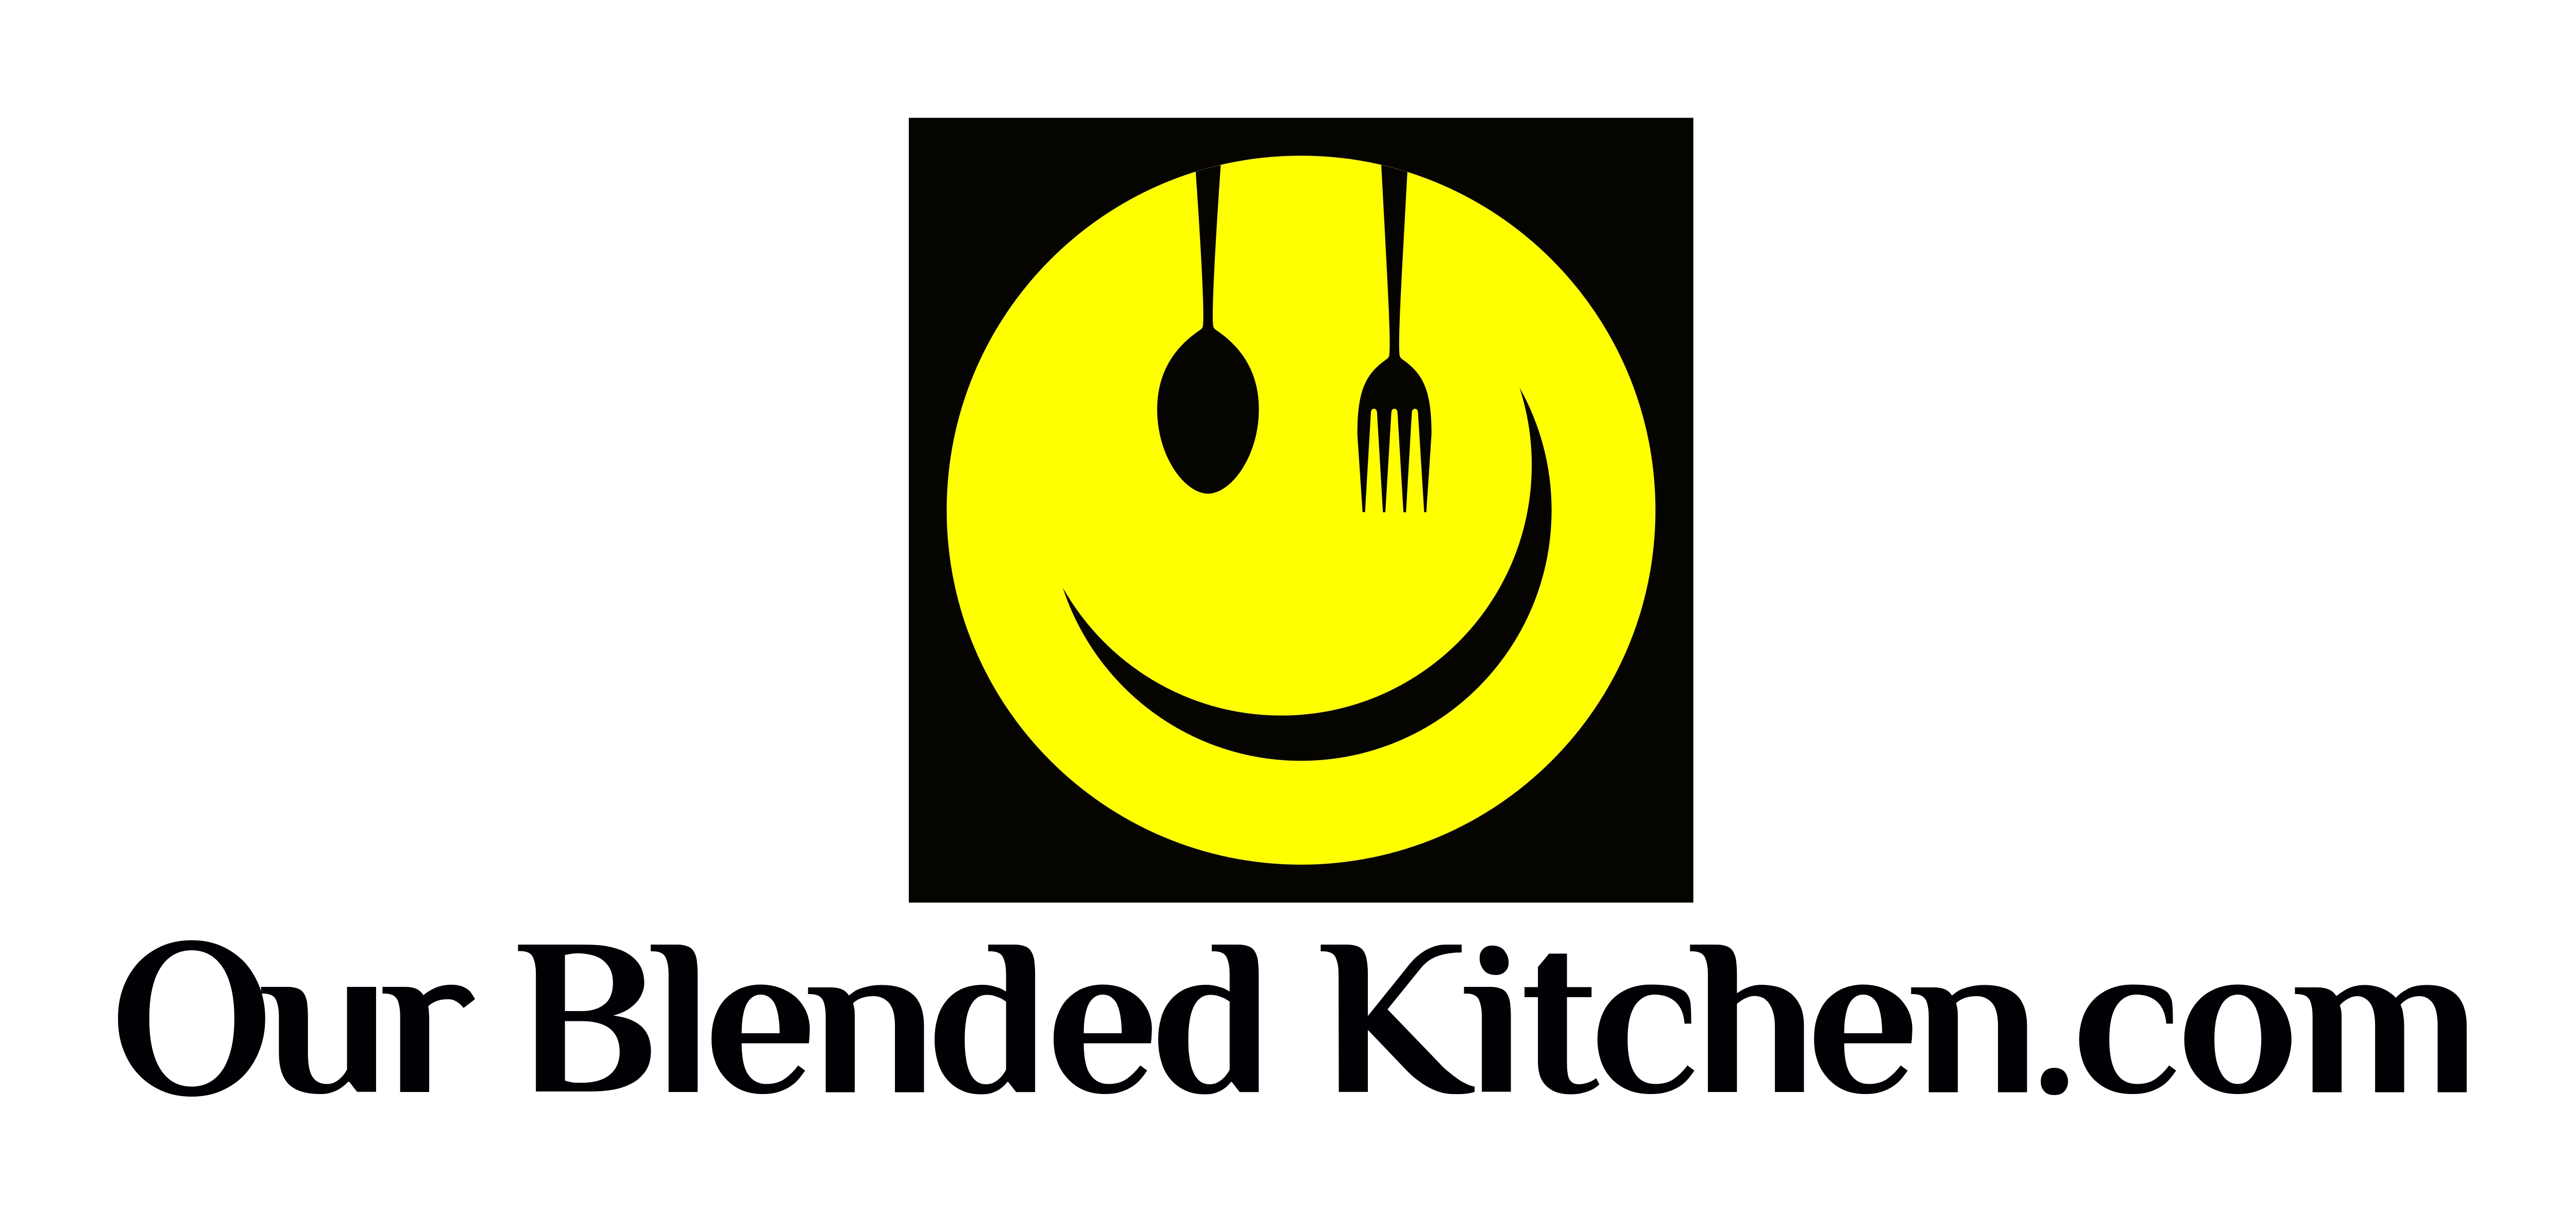 ourblendedkitchen.com